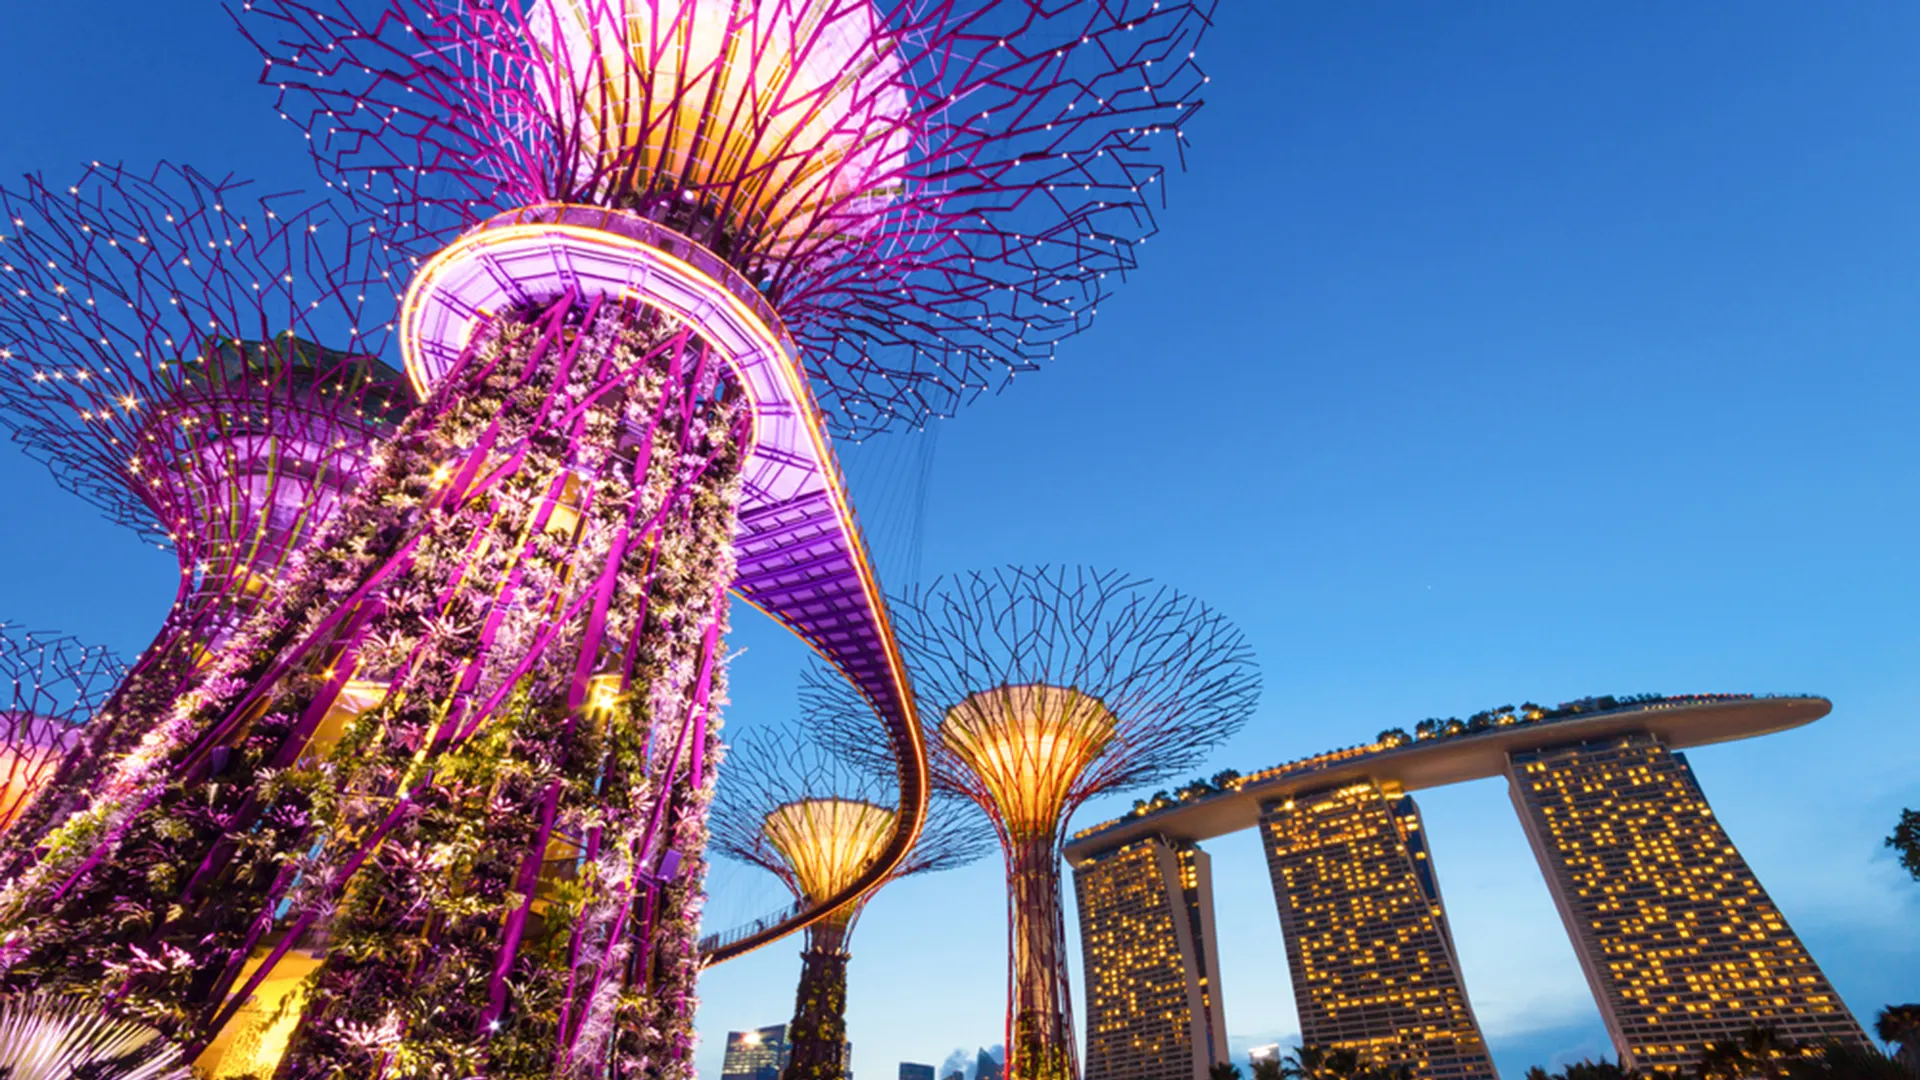 See The Best Of Singapore's Marina Bay In A Day! - Klook Travel Blog